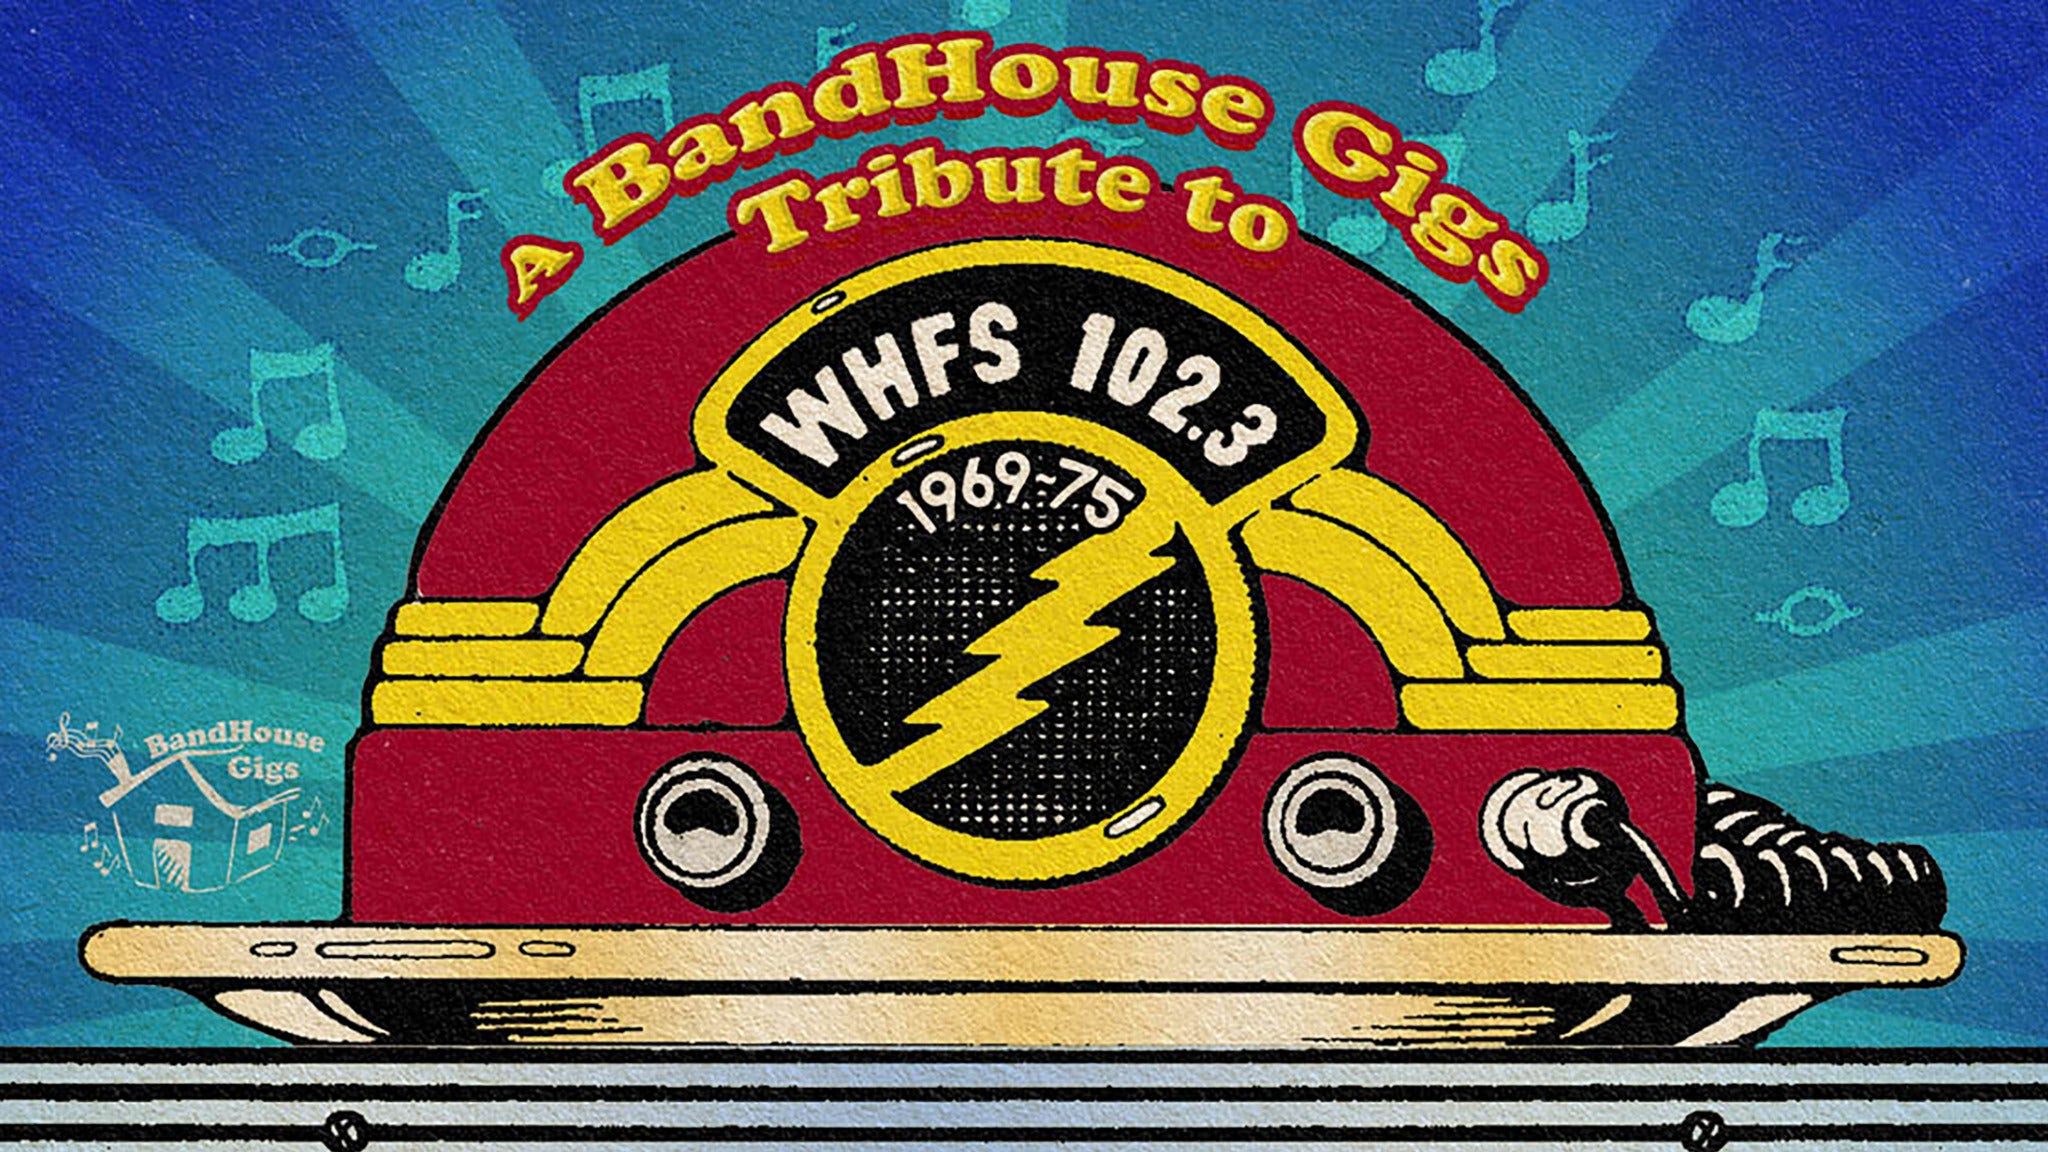 Bandhouse Gigs - A TRIBUTE TO TOM PETTY